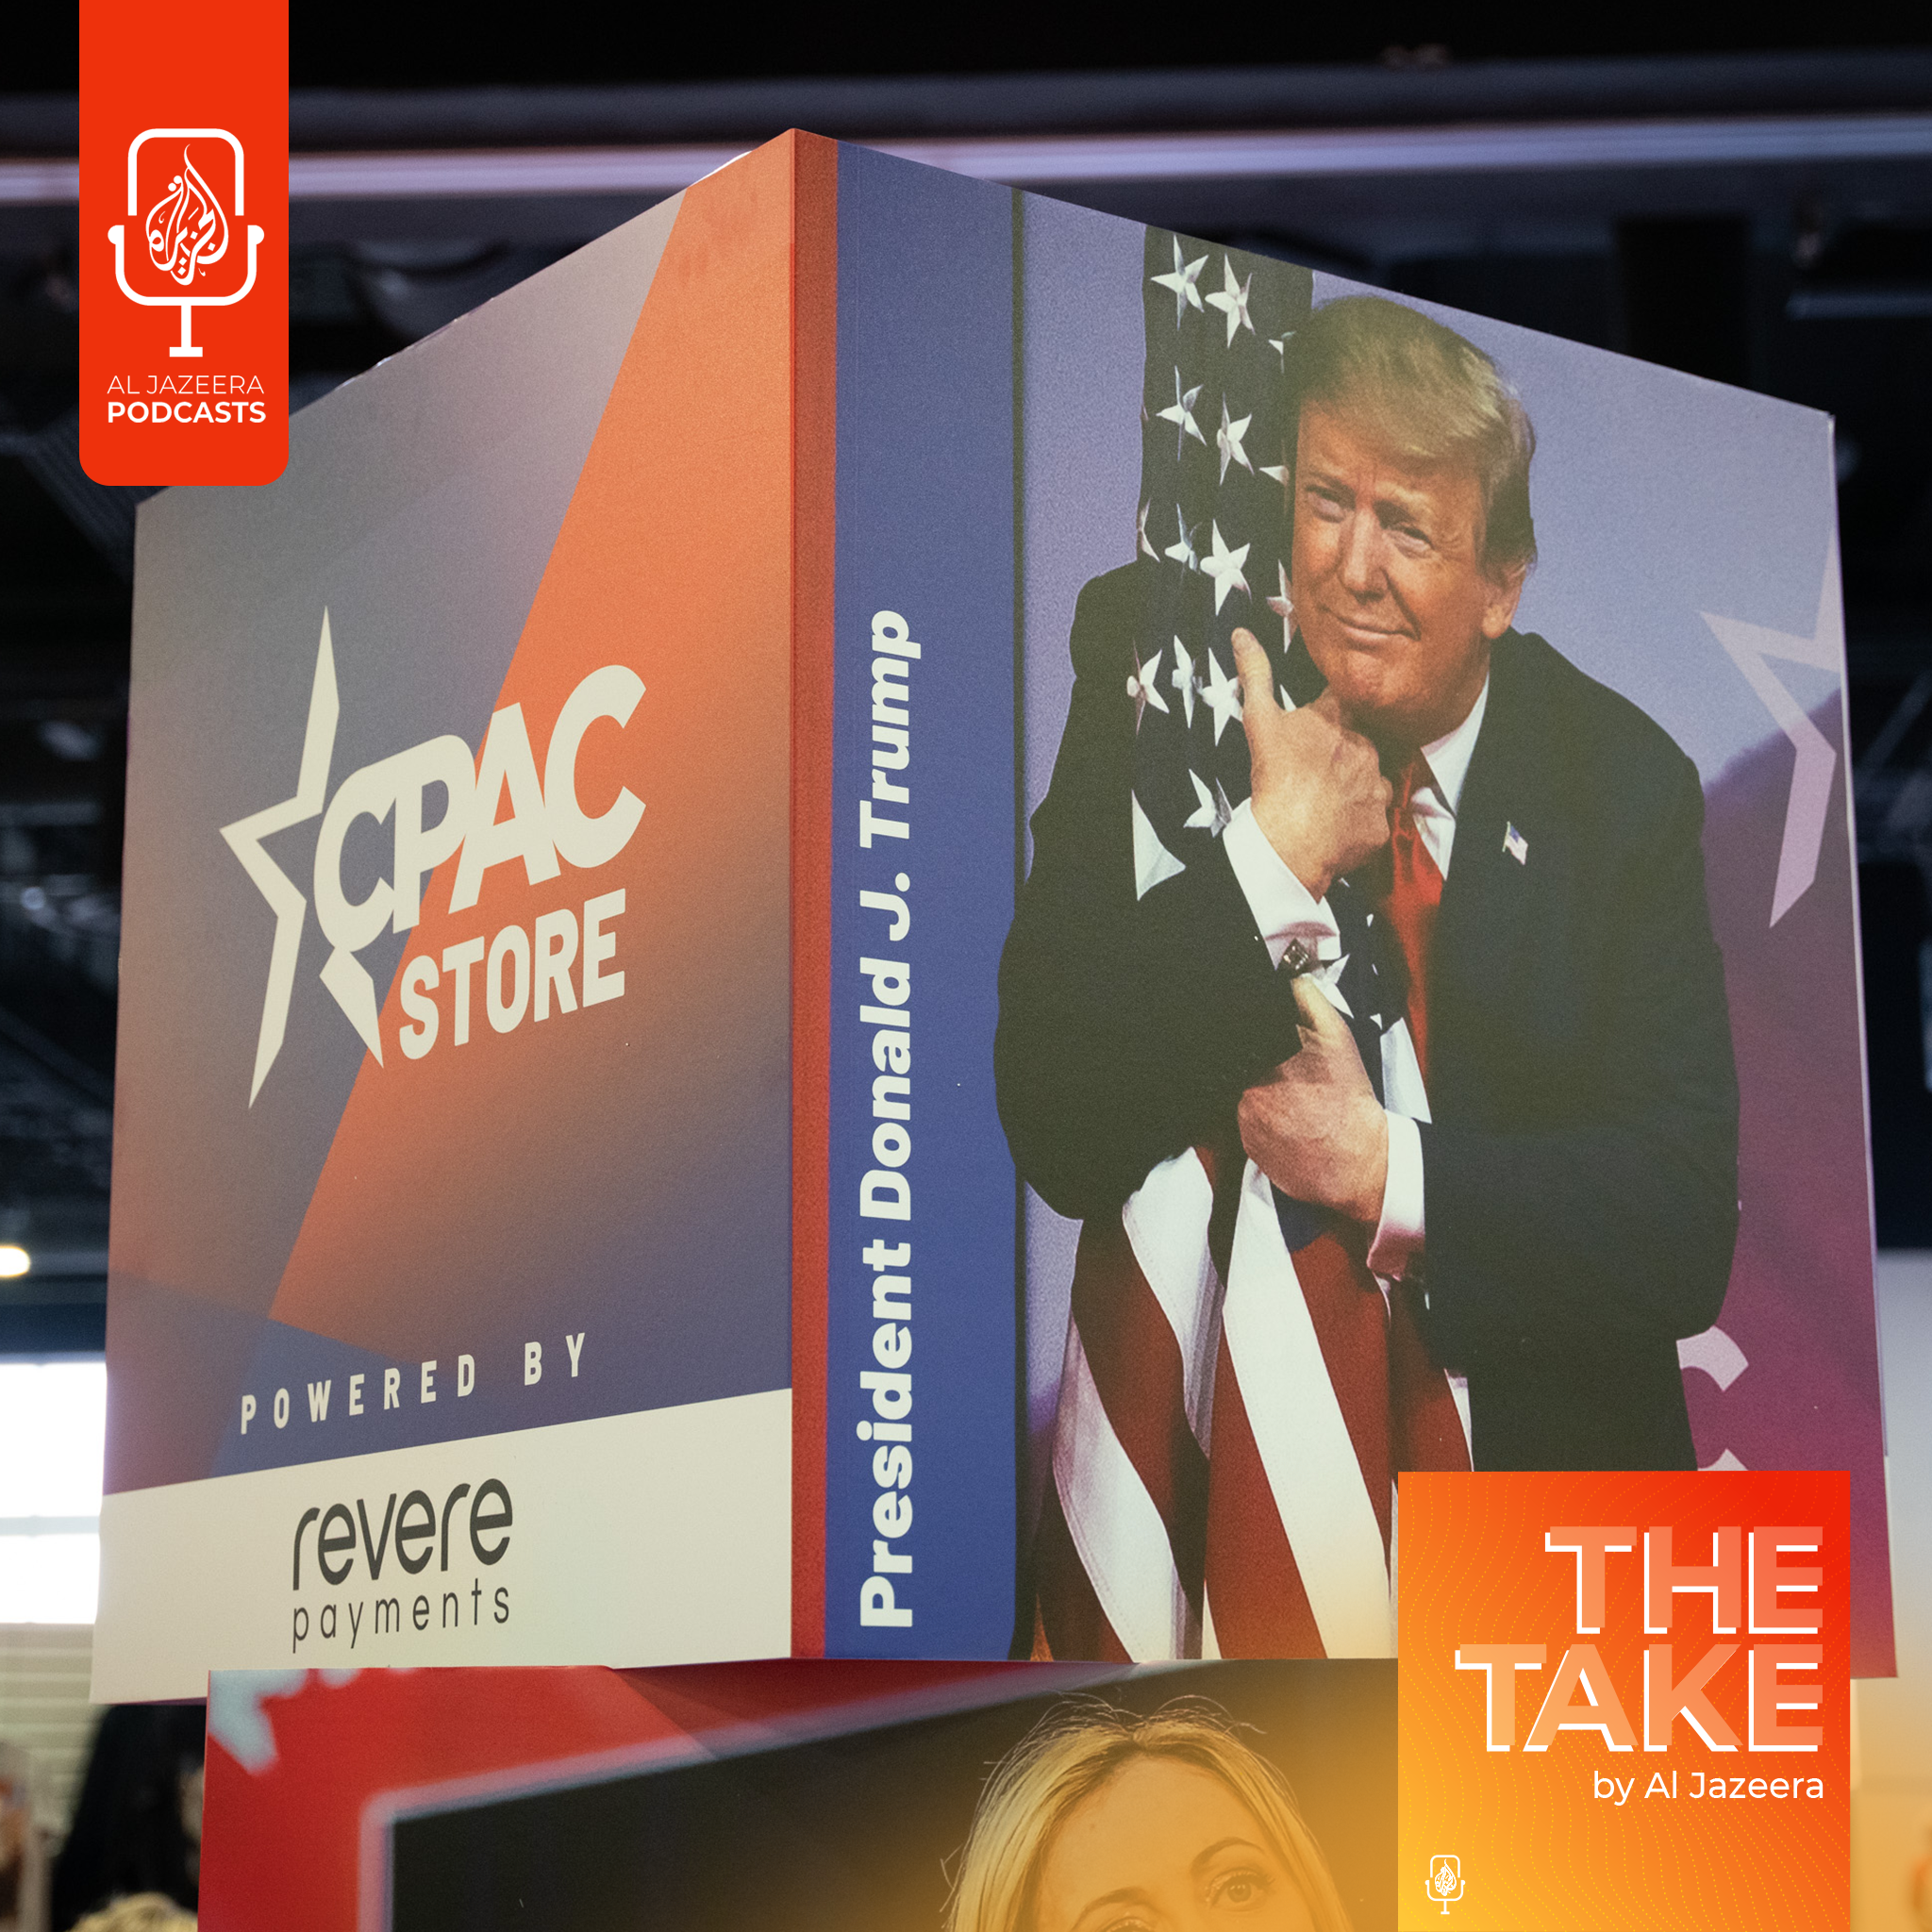 ‘Where globalism goes to die’: inside the US right at CPAC